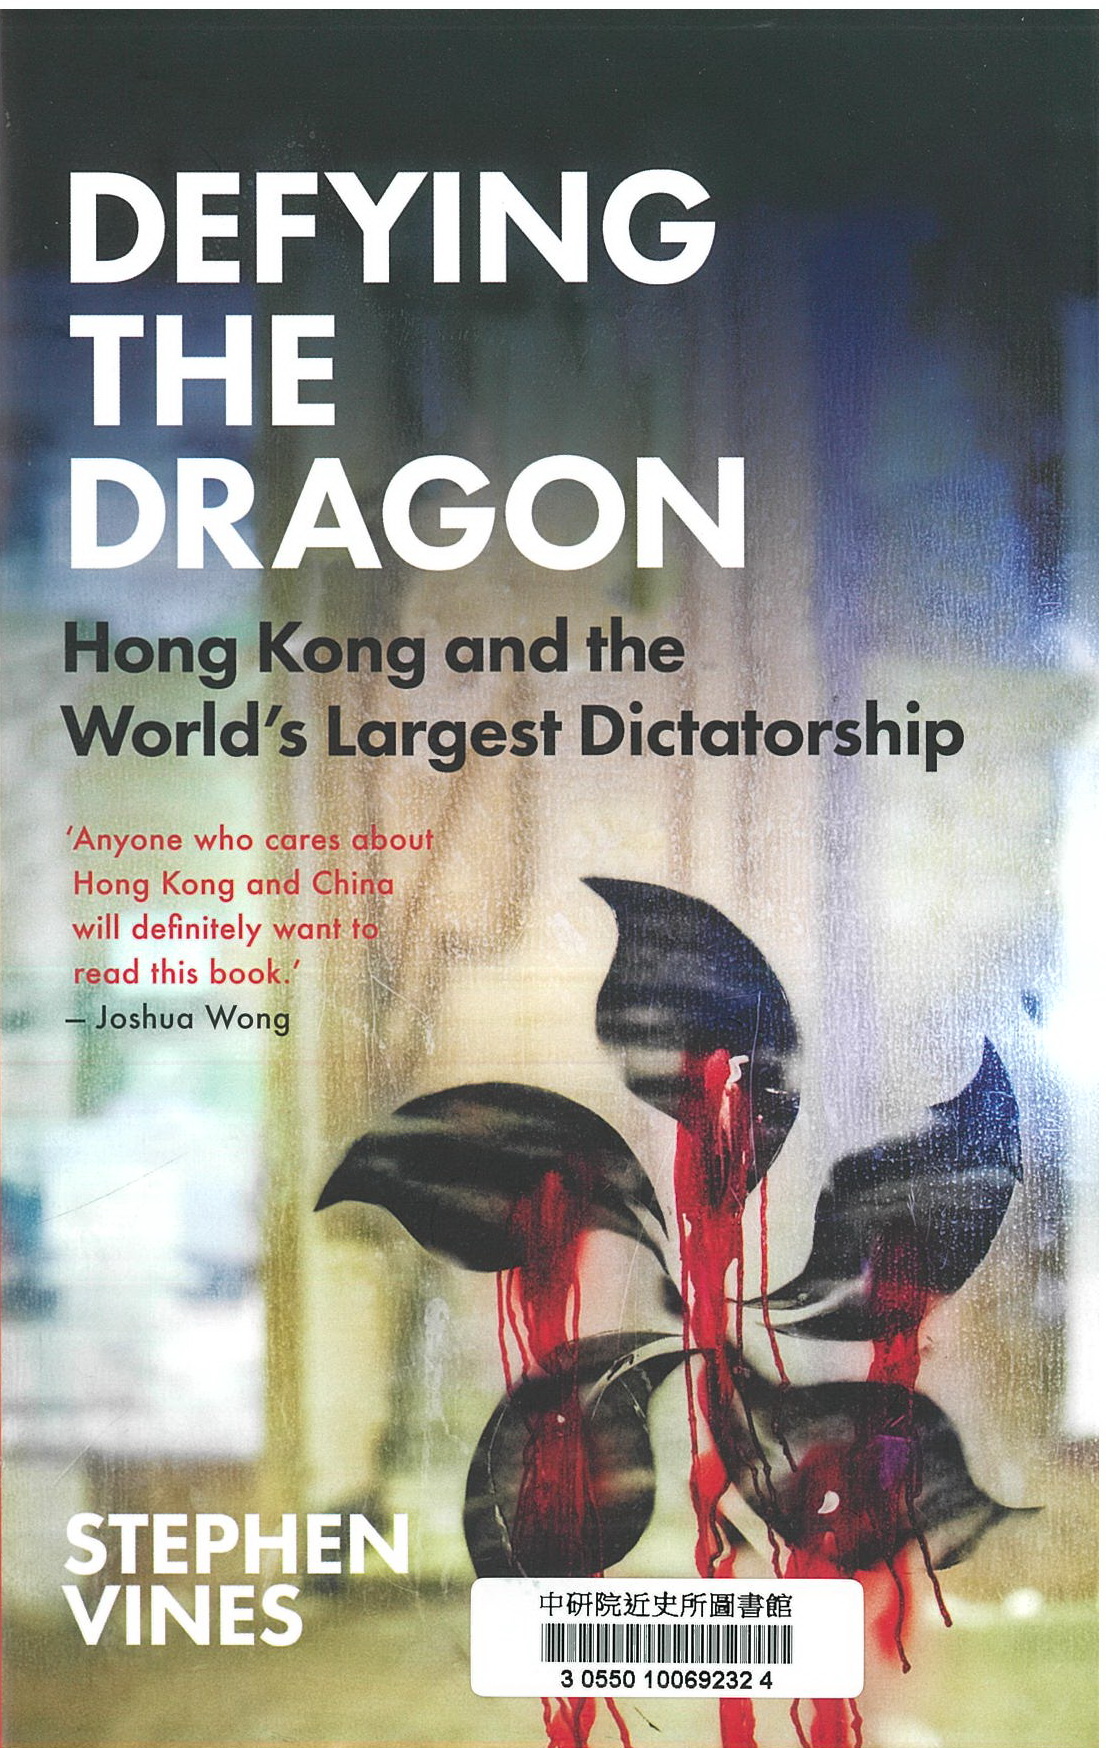 Defying the dragon : Hong Kong and the world's largest dictatorship